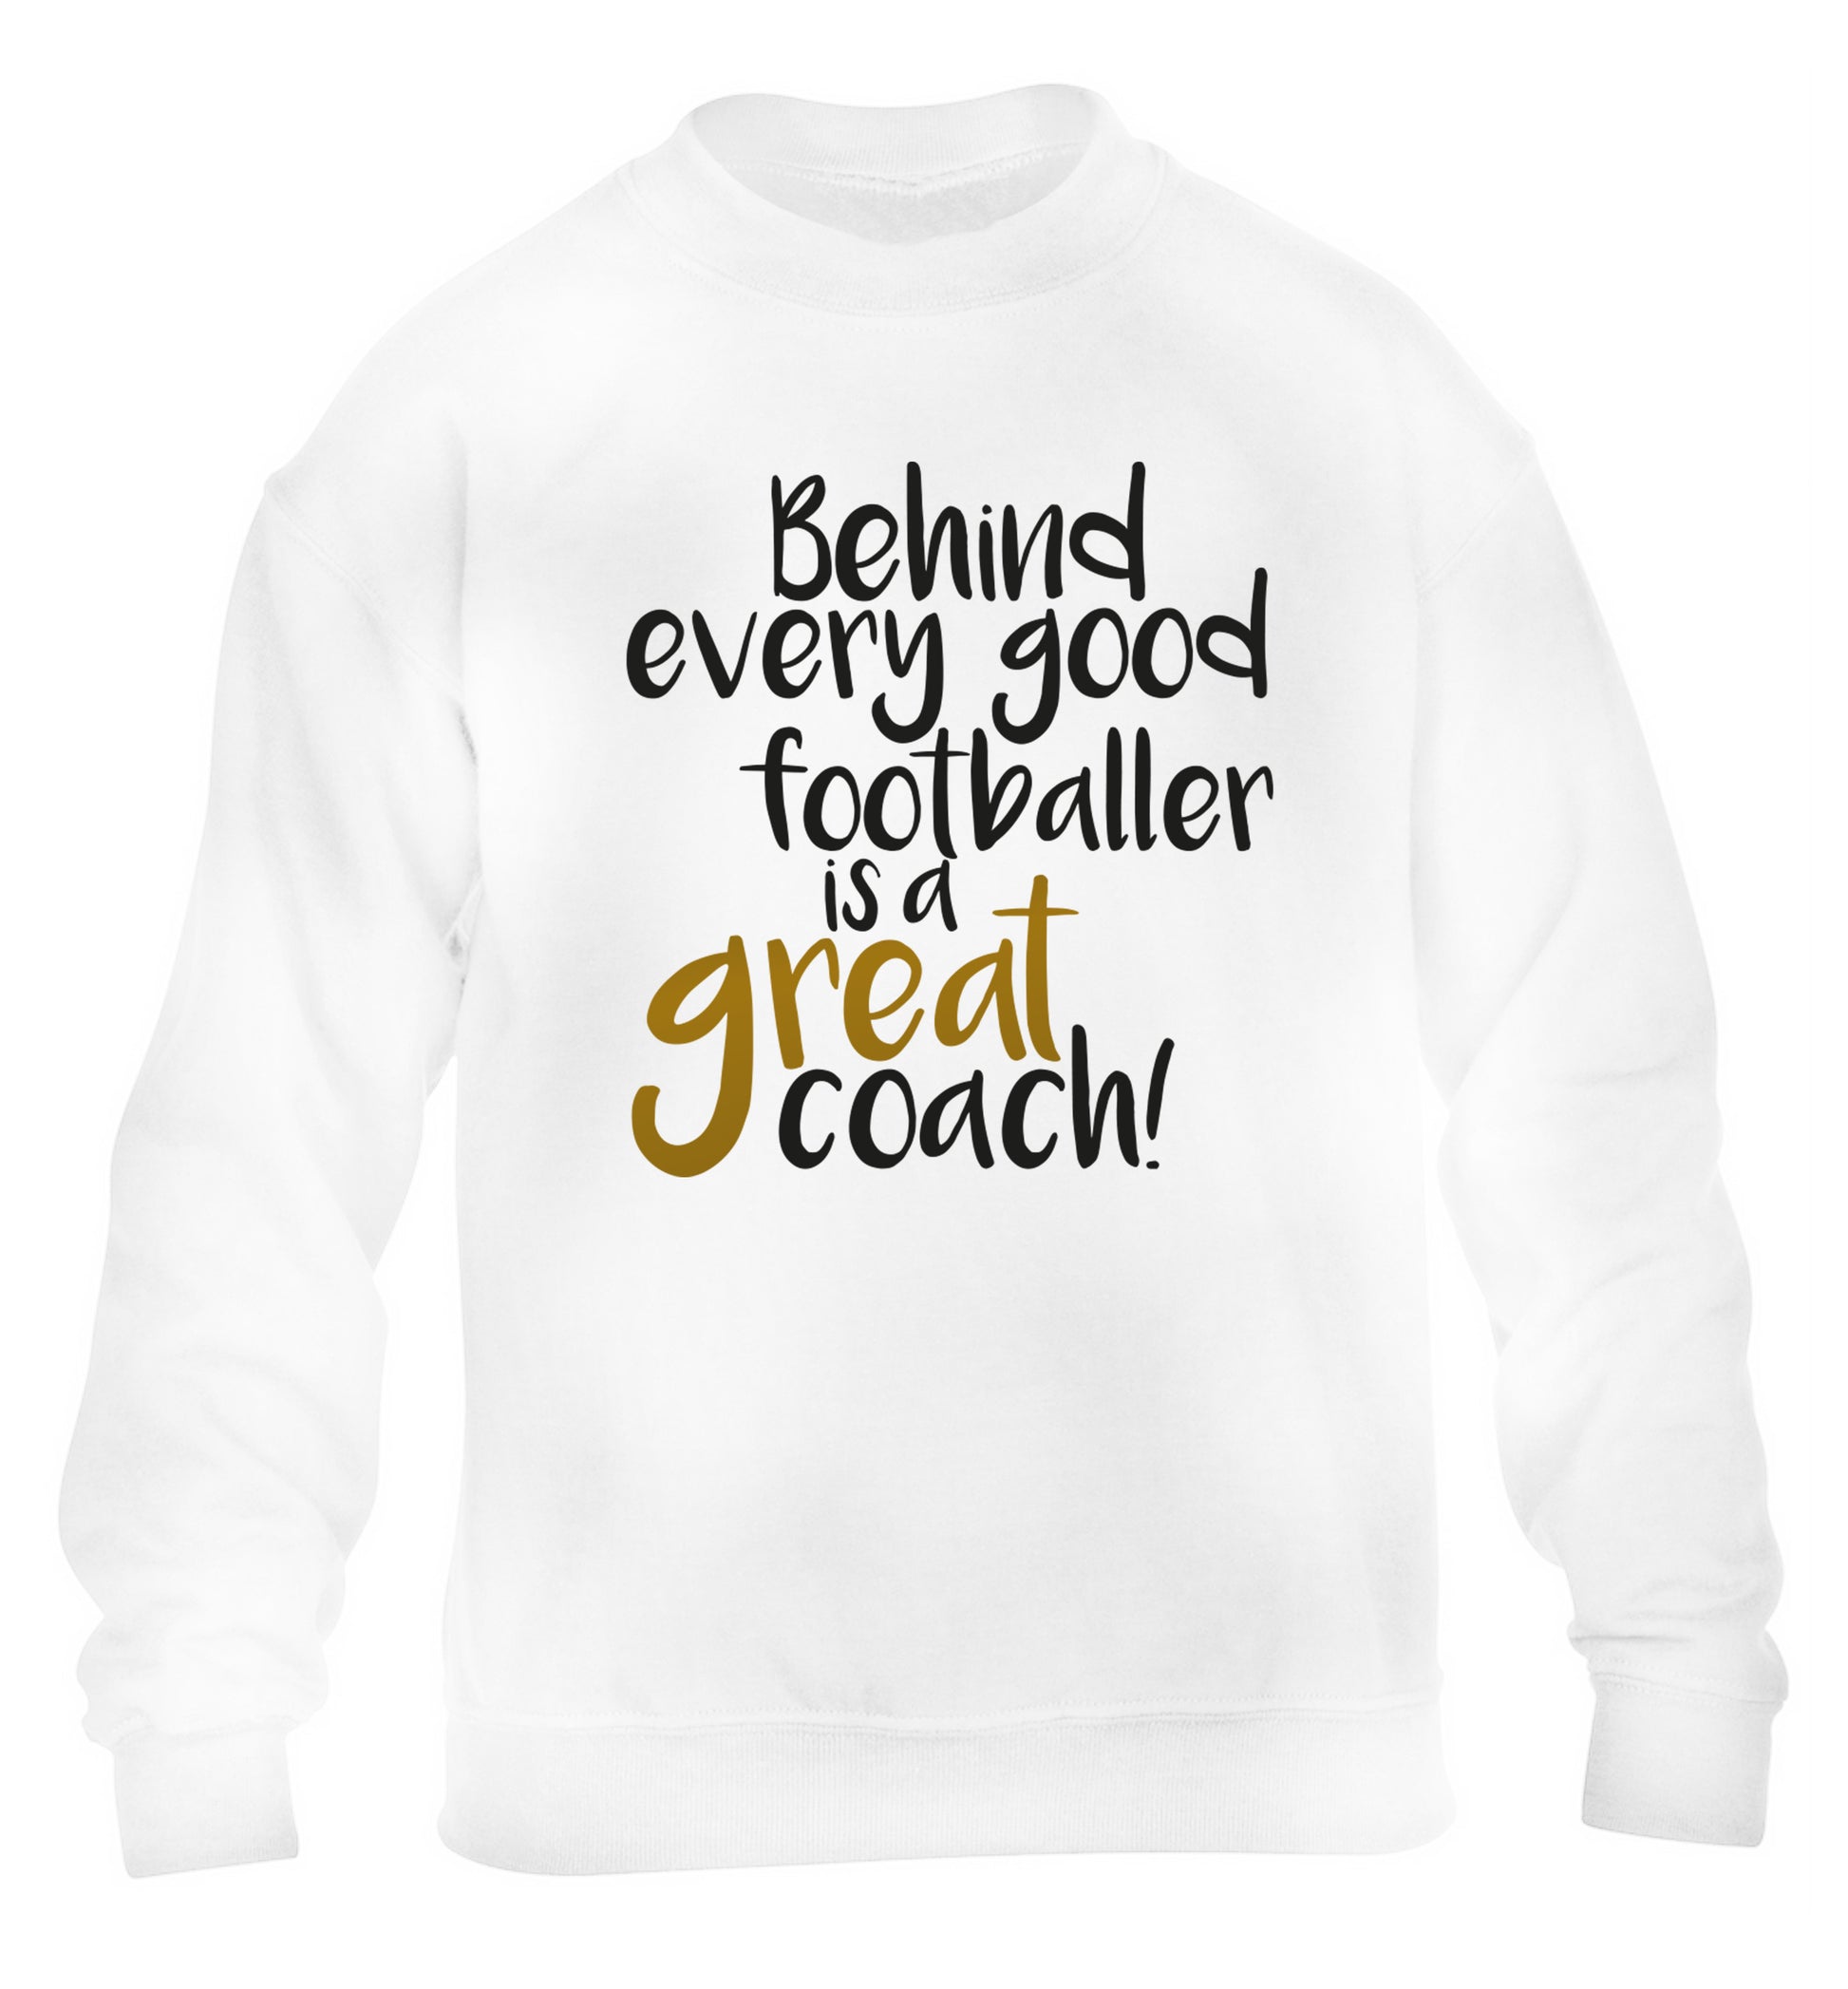 Behind every good footballer is a great coach! children's white sweater 12-14 Years